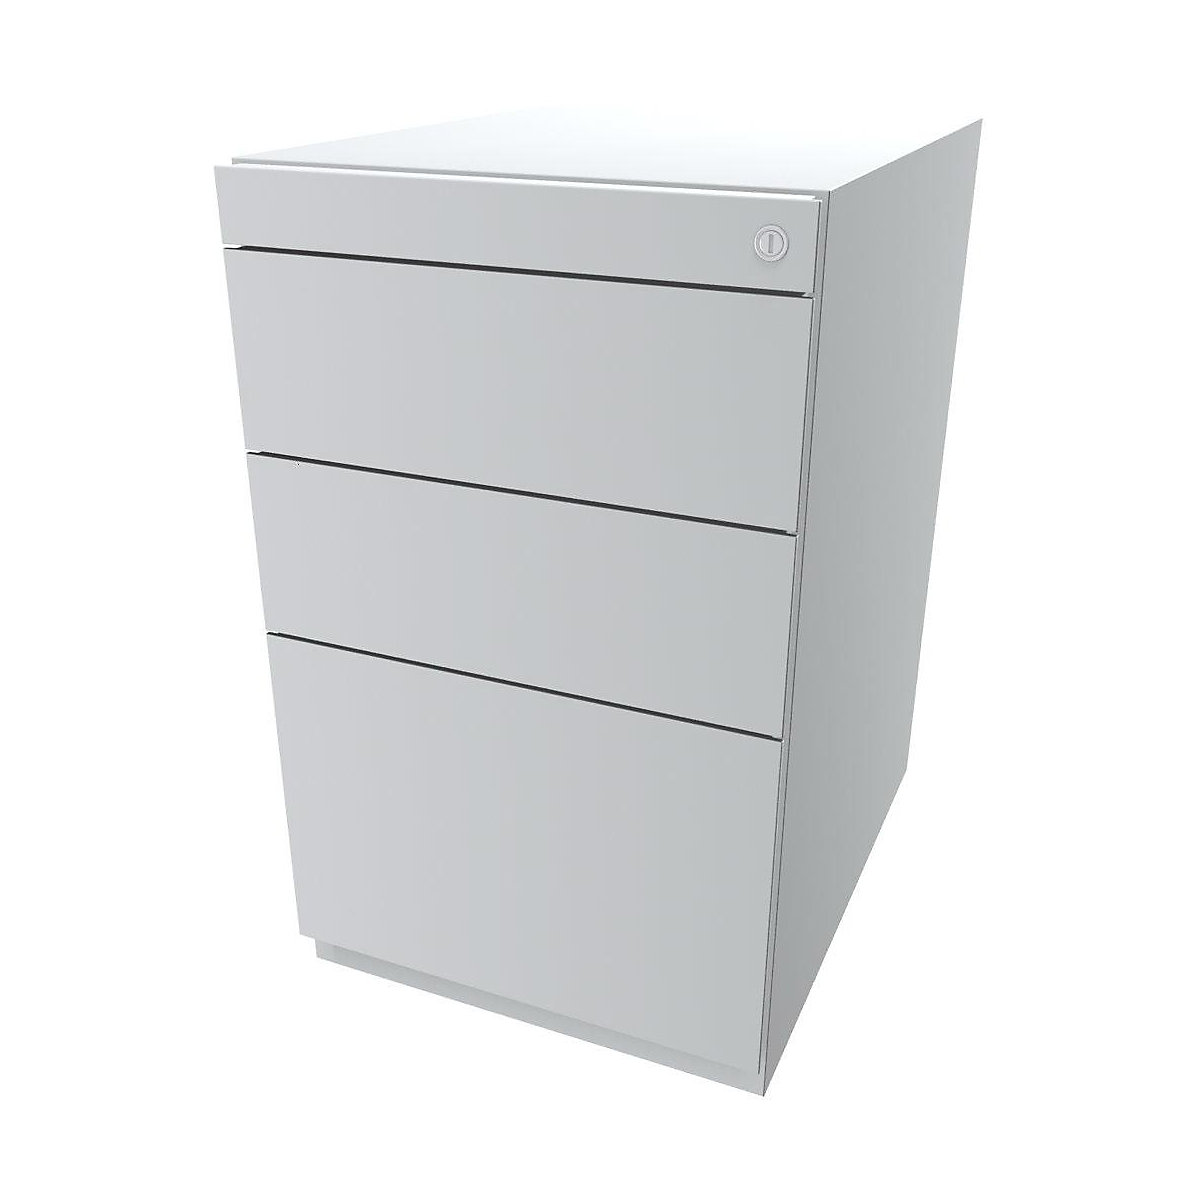 Note™ fixed pedestal, with 2 universal drawers, 1 suspension file drawer – BISLEY, without top, depth 565 mm, traffic white-12